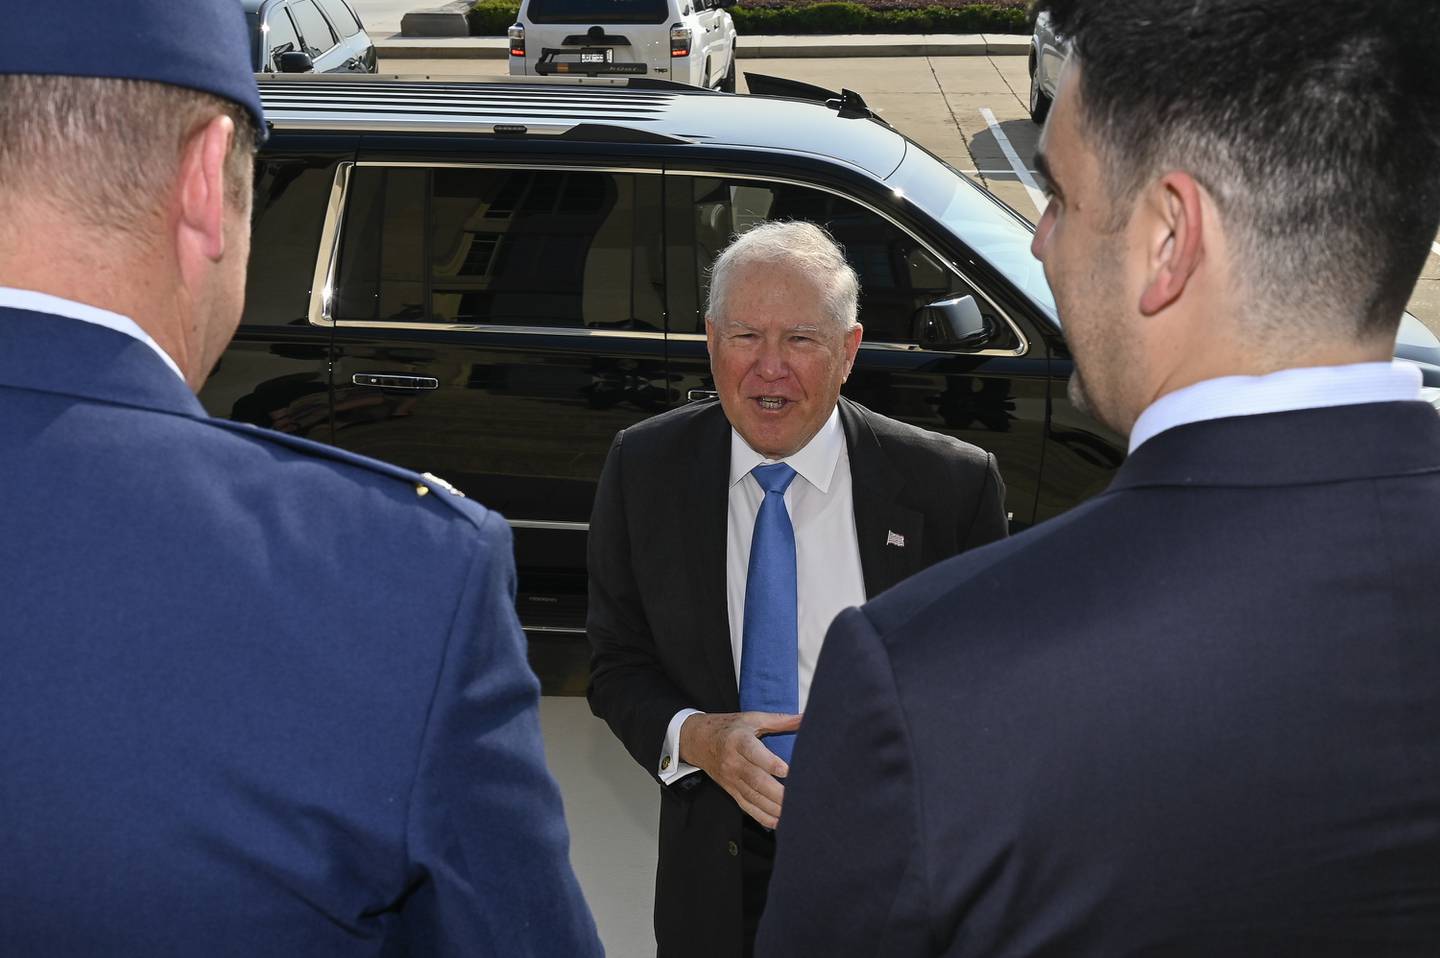 Former Defense Department acquisition chief Frank Kendall arrived at the Pentagon on July 28, 2021 and was administratively sworn in as the 26th Secretary of the Air Force. (Air Force photo)